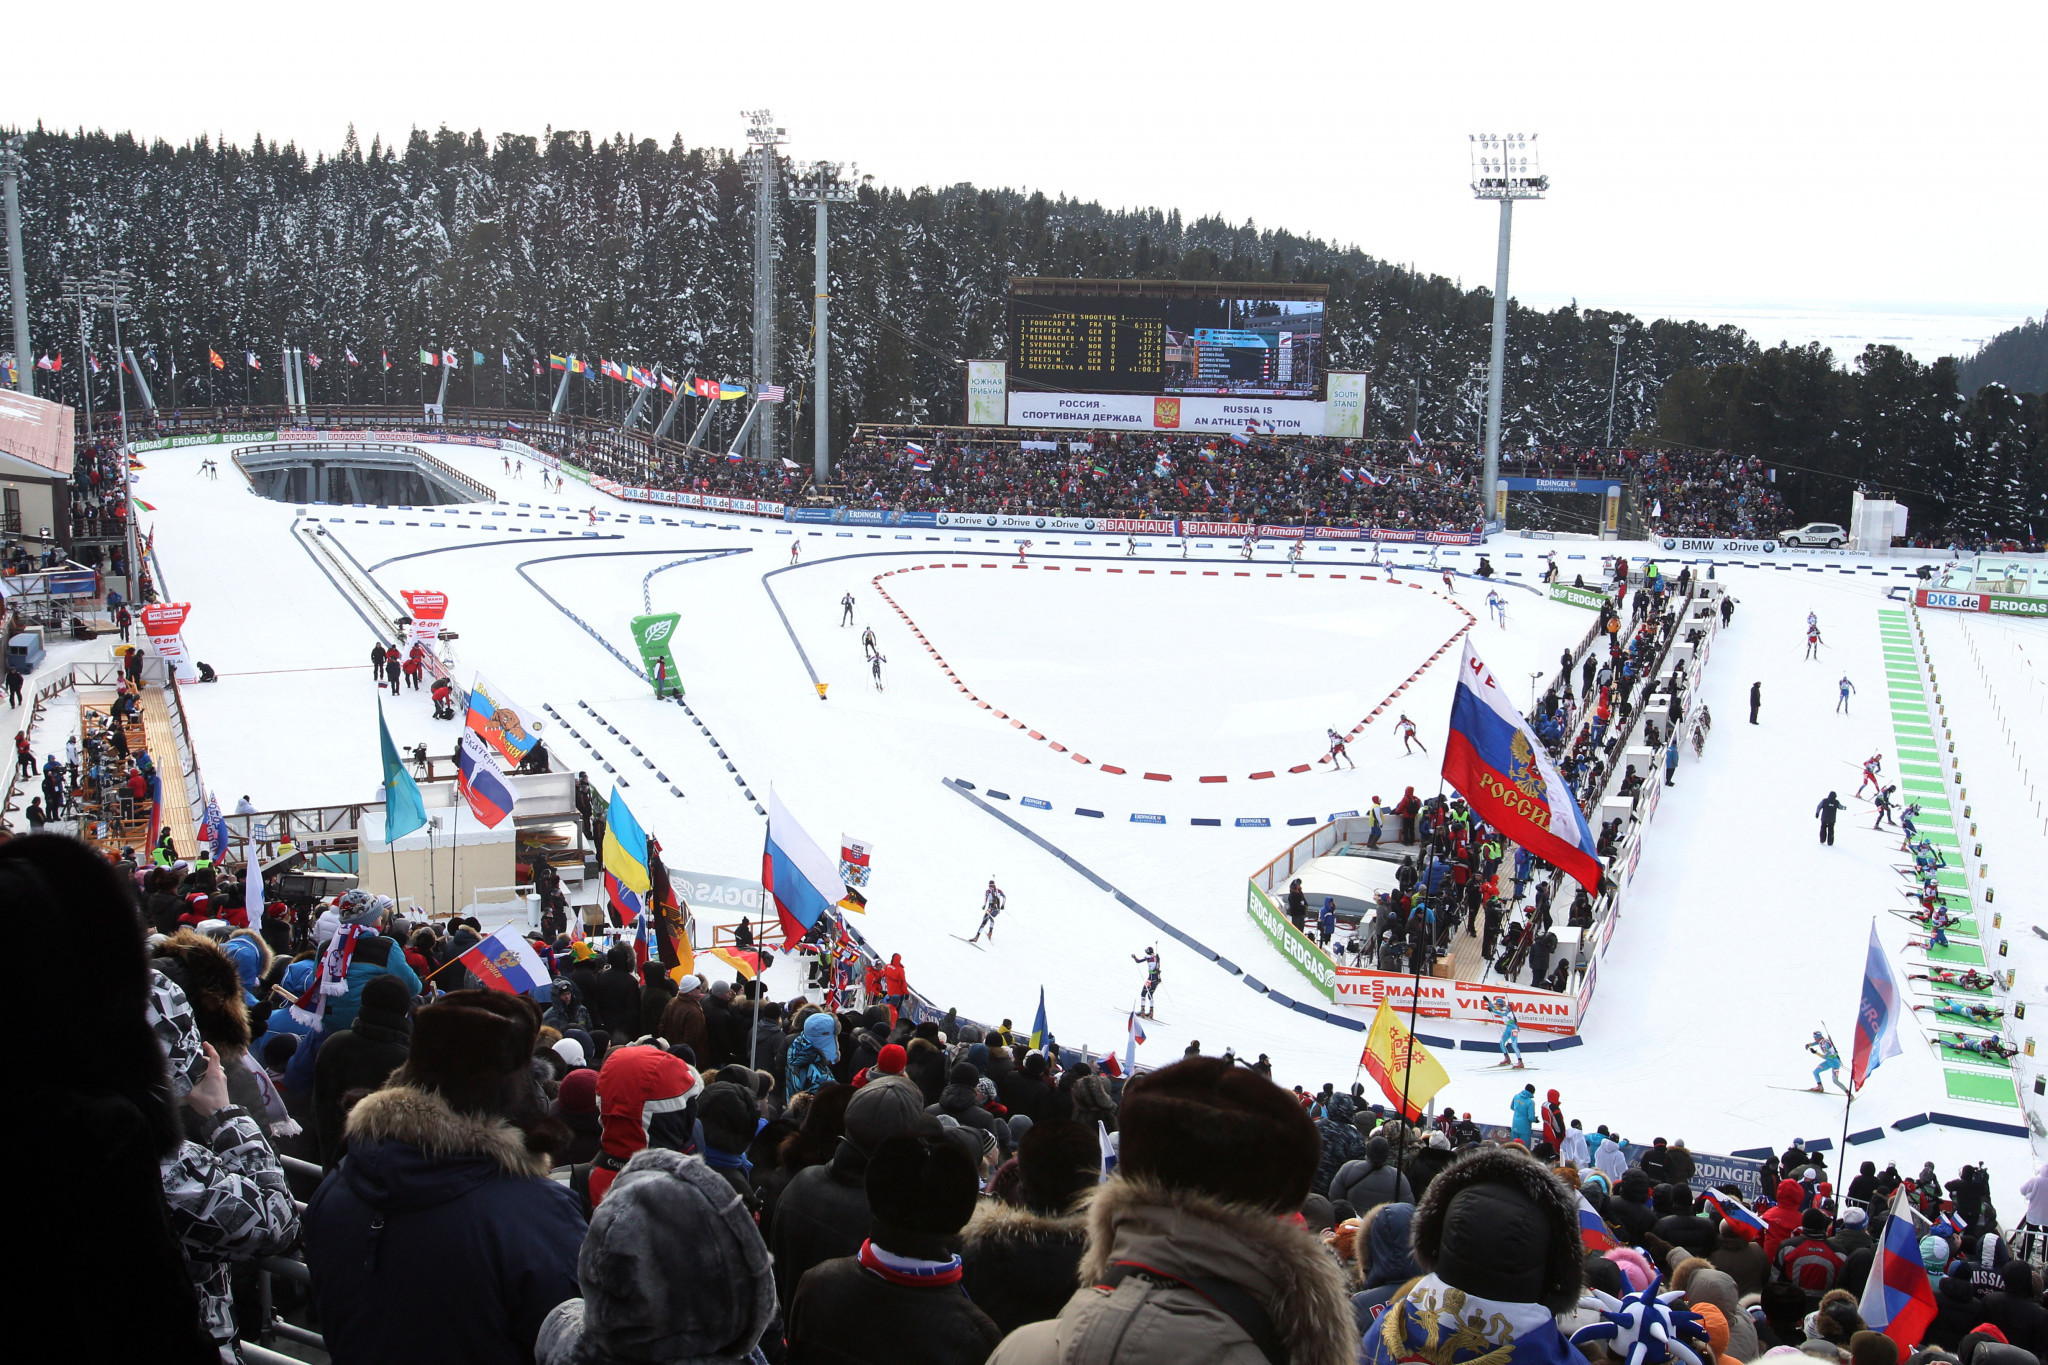 Khanty-Mansiysk new preferred host for Russia's Paralympics replacement event